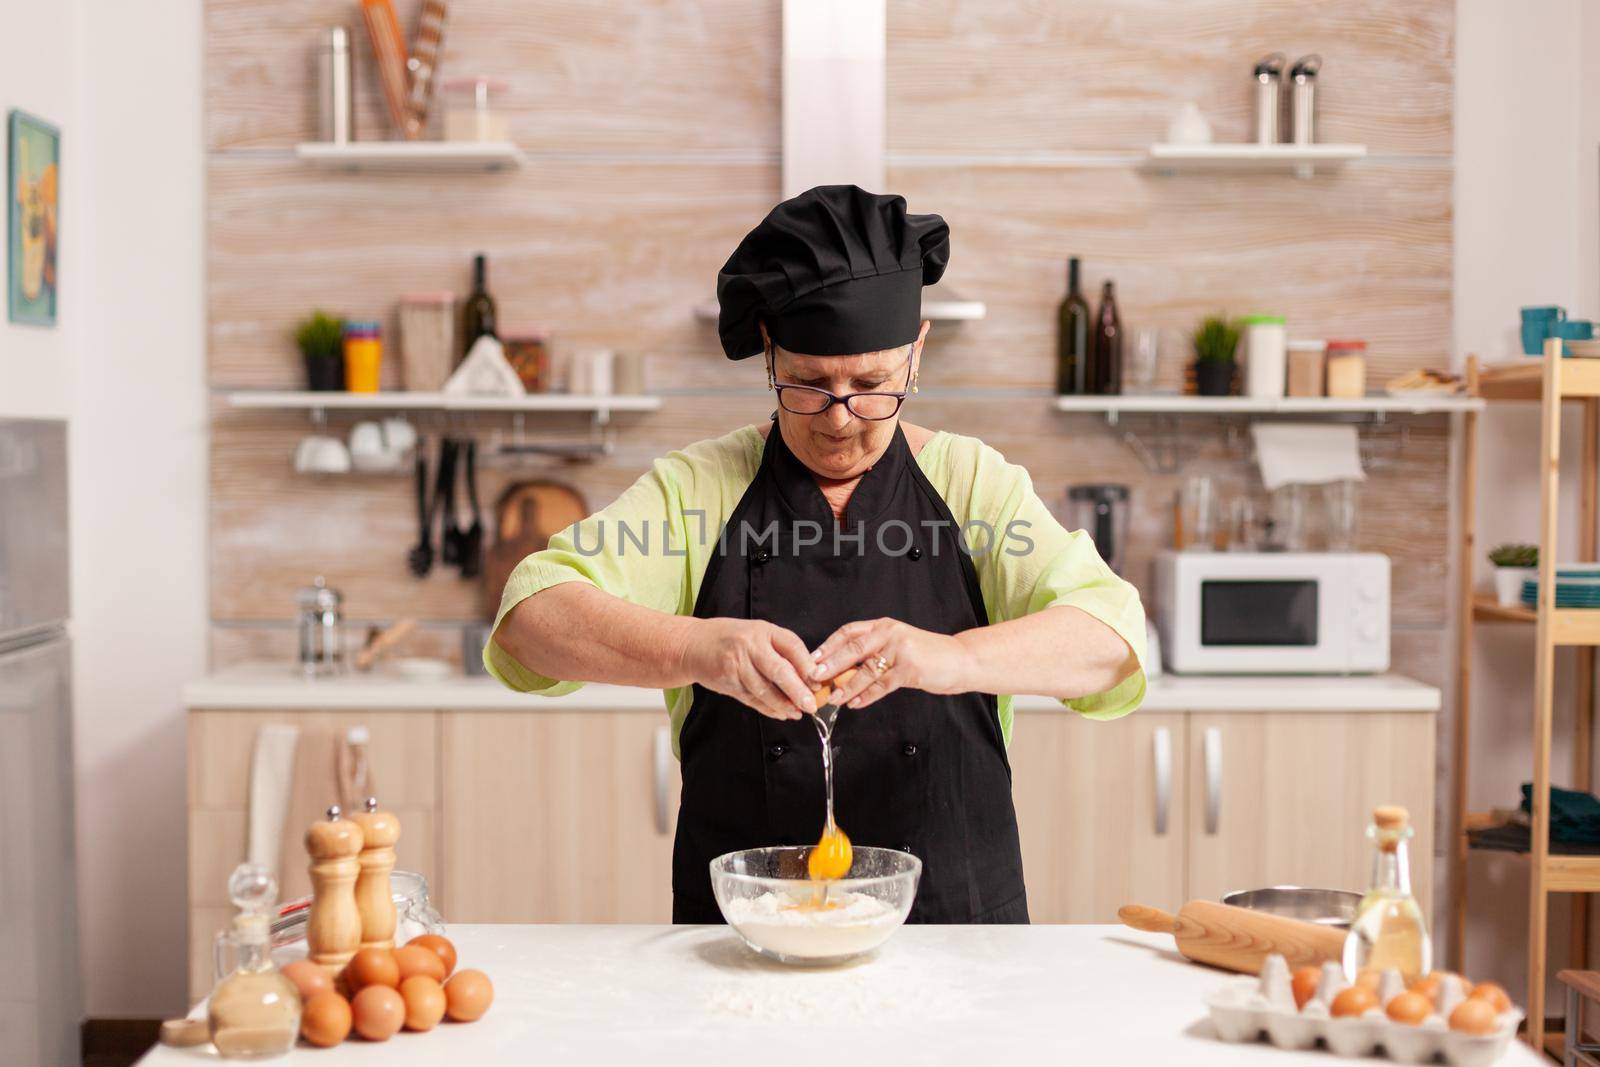 Elderly woman cracking eggs over wheat flour in home kitchen. Elderly pastry chef cracking egg on glass bowl for cake recipe in kitchen, mixing by hand, kneading